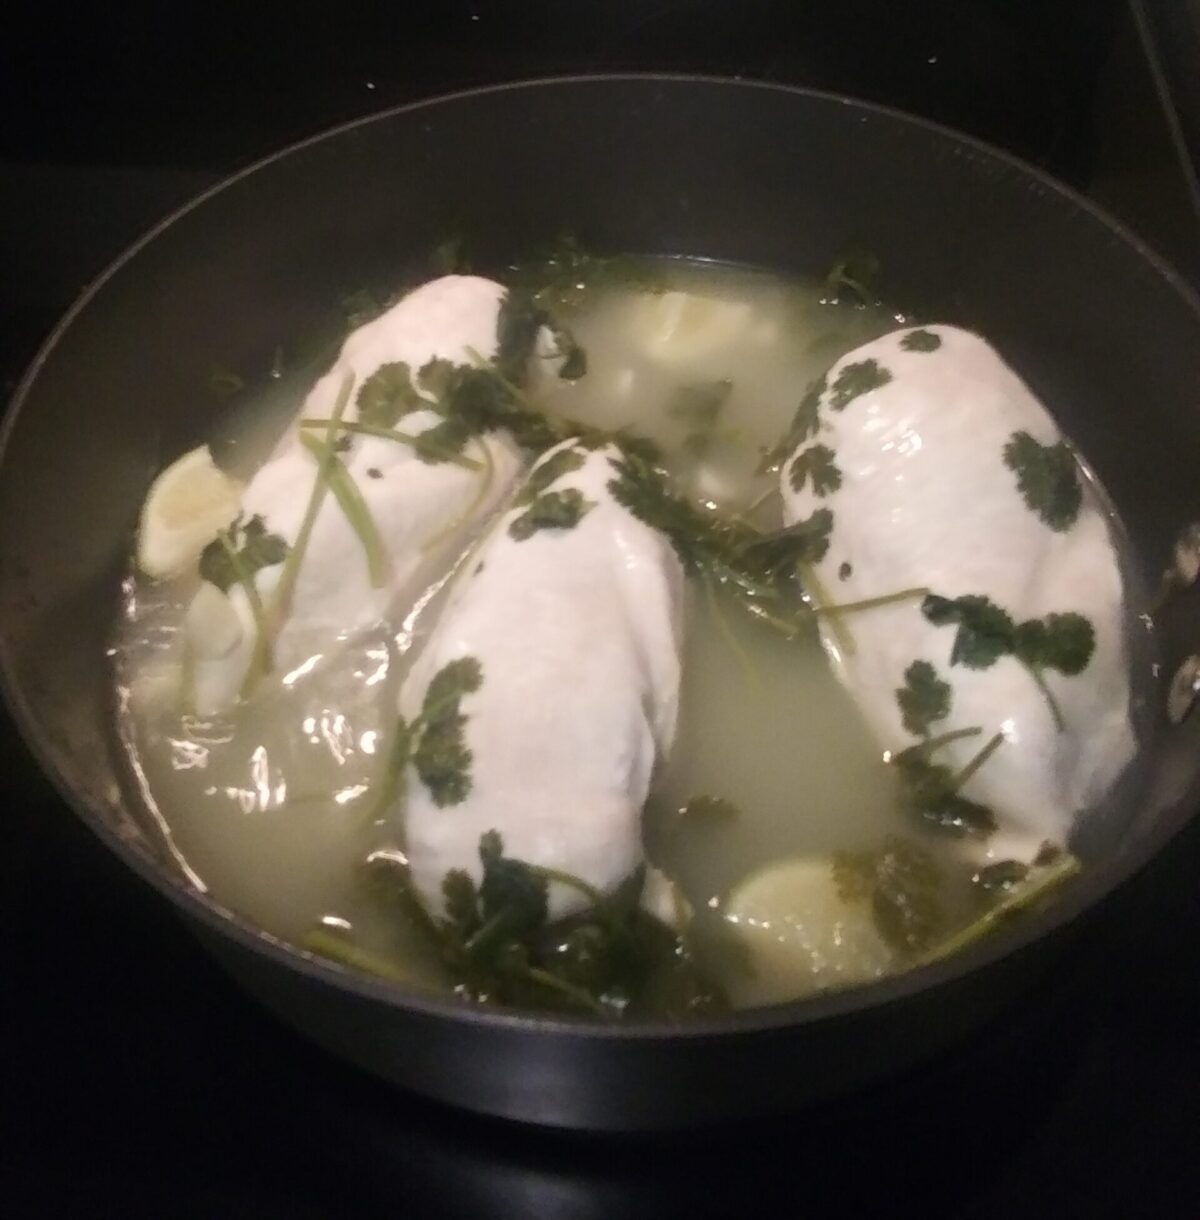 poached chicken in herbs